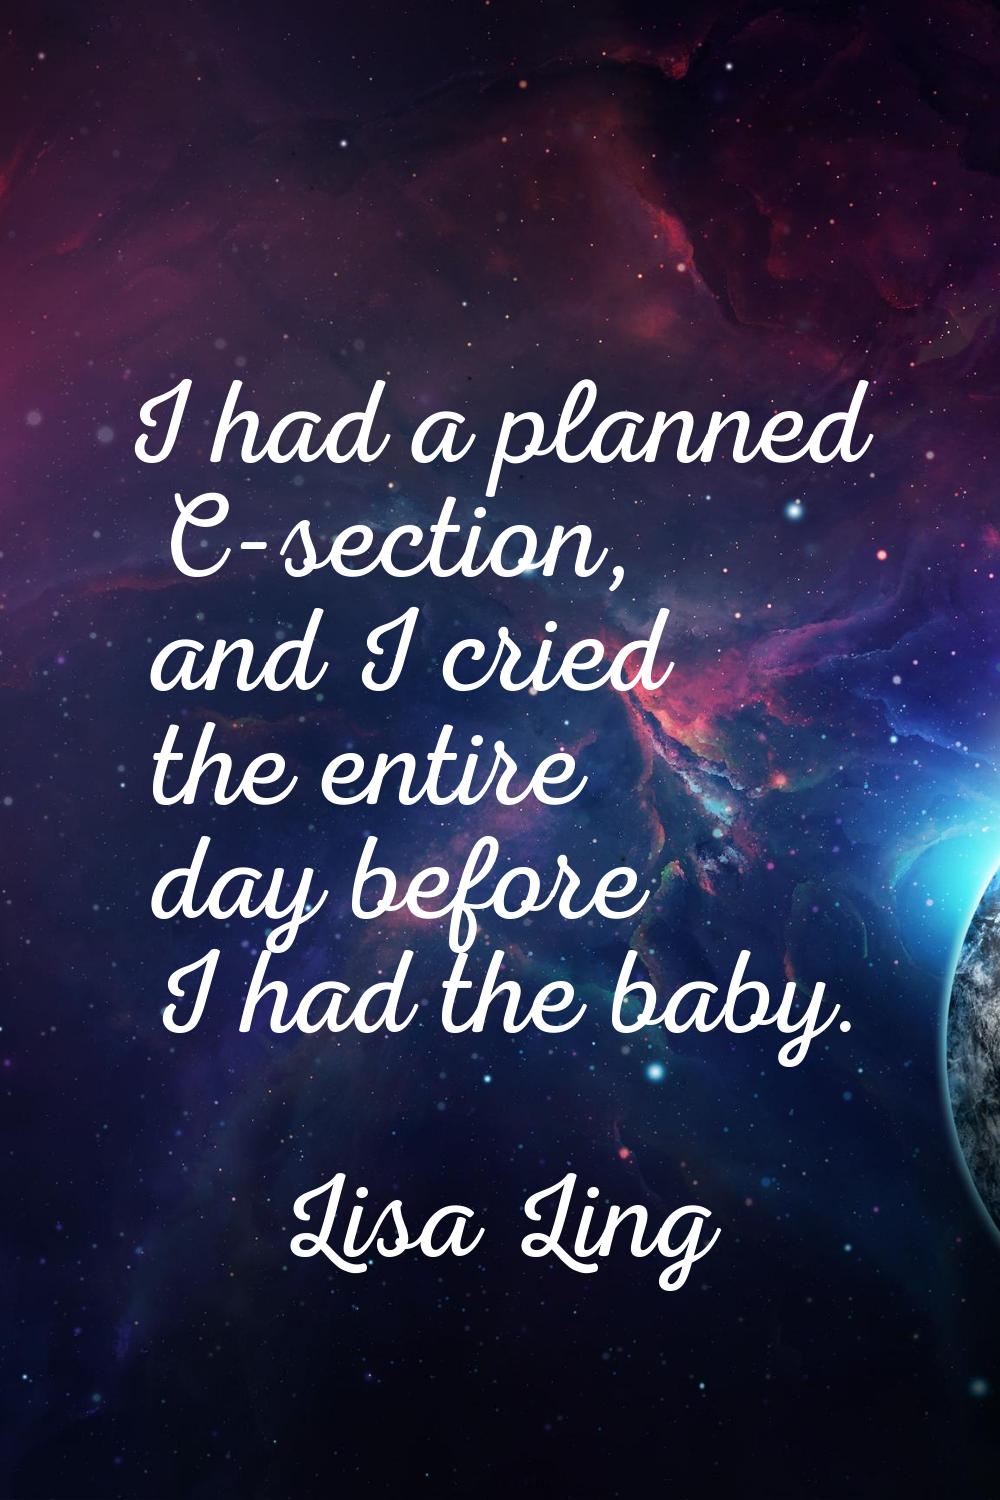 I had a planned C-section, and I cried the entire day before I had the baby.